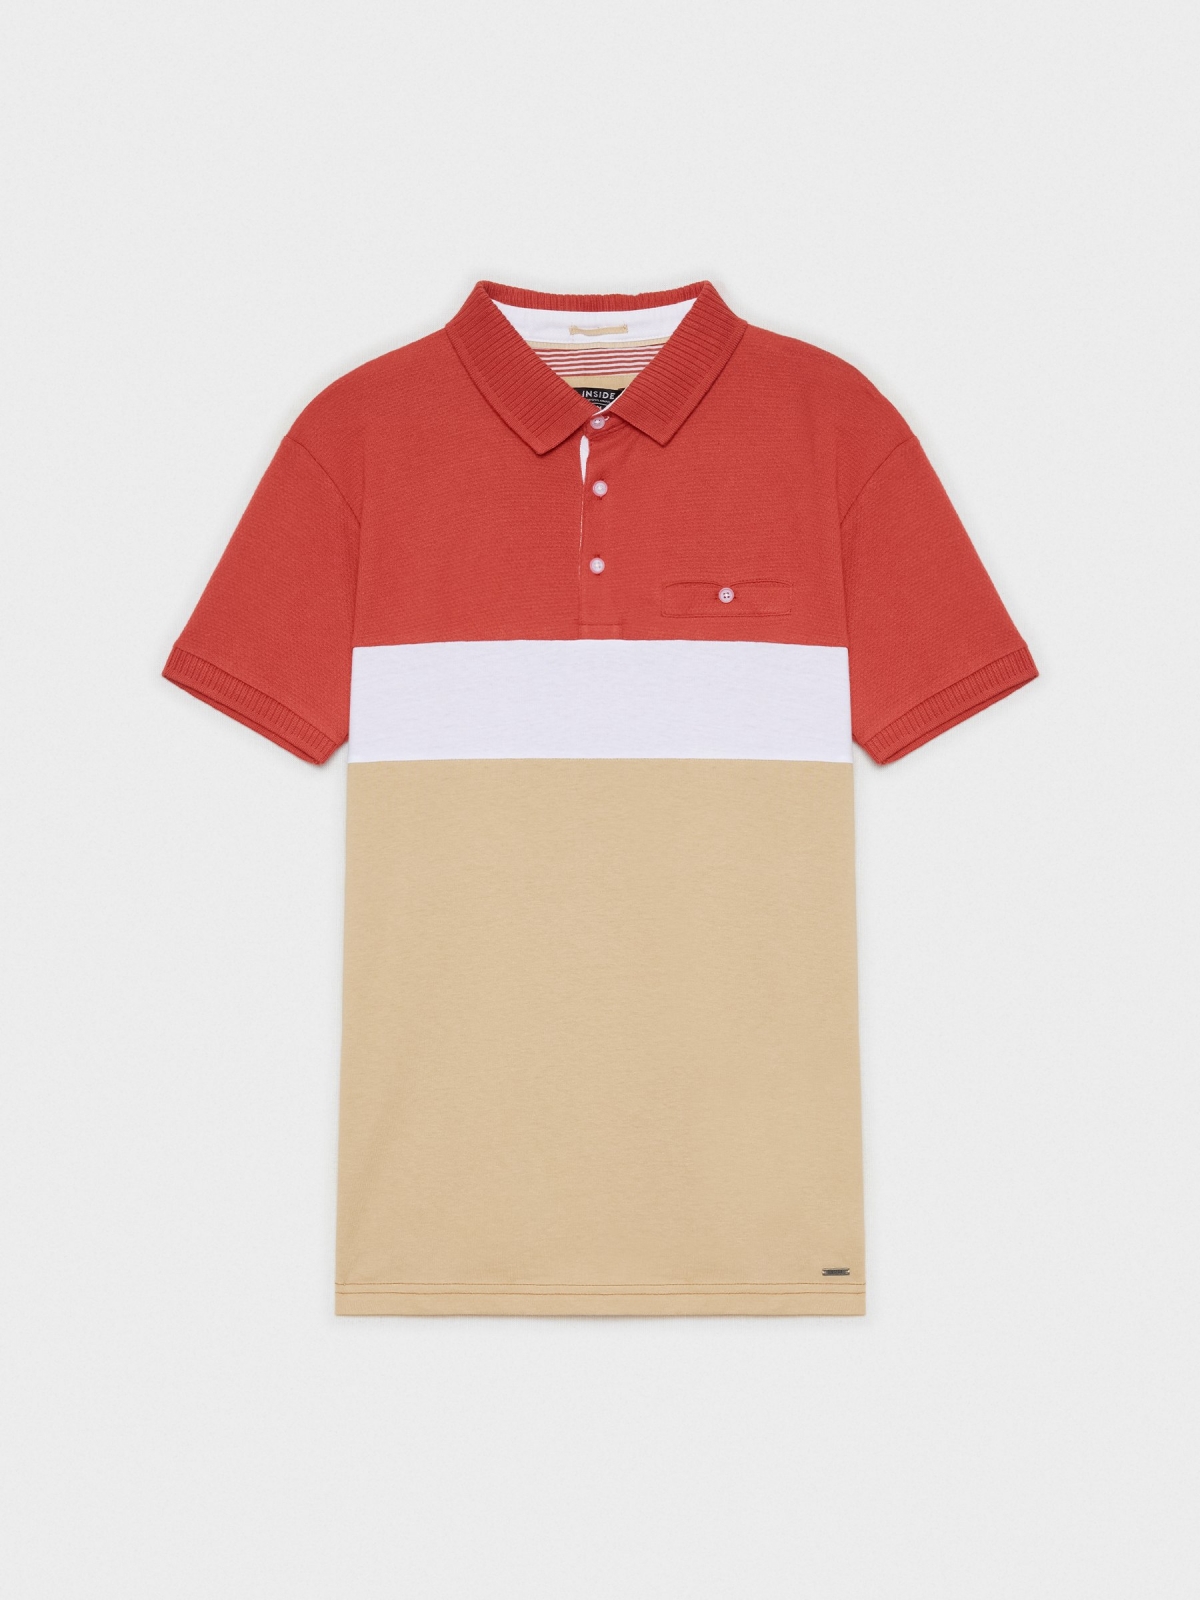  Woven striped polo shirt brick red